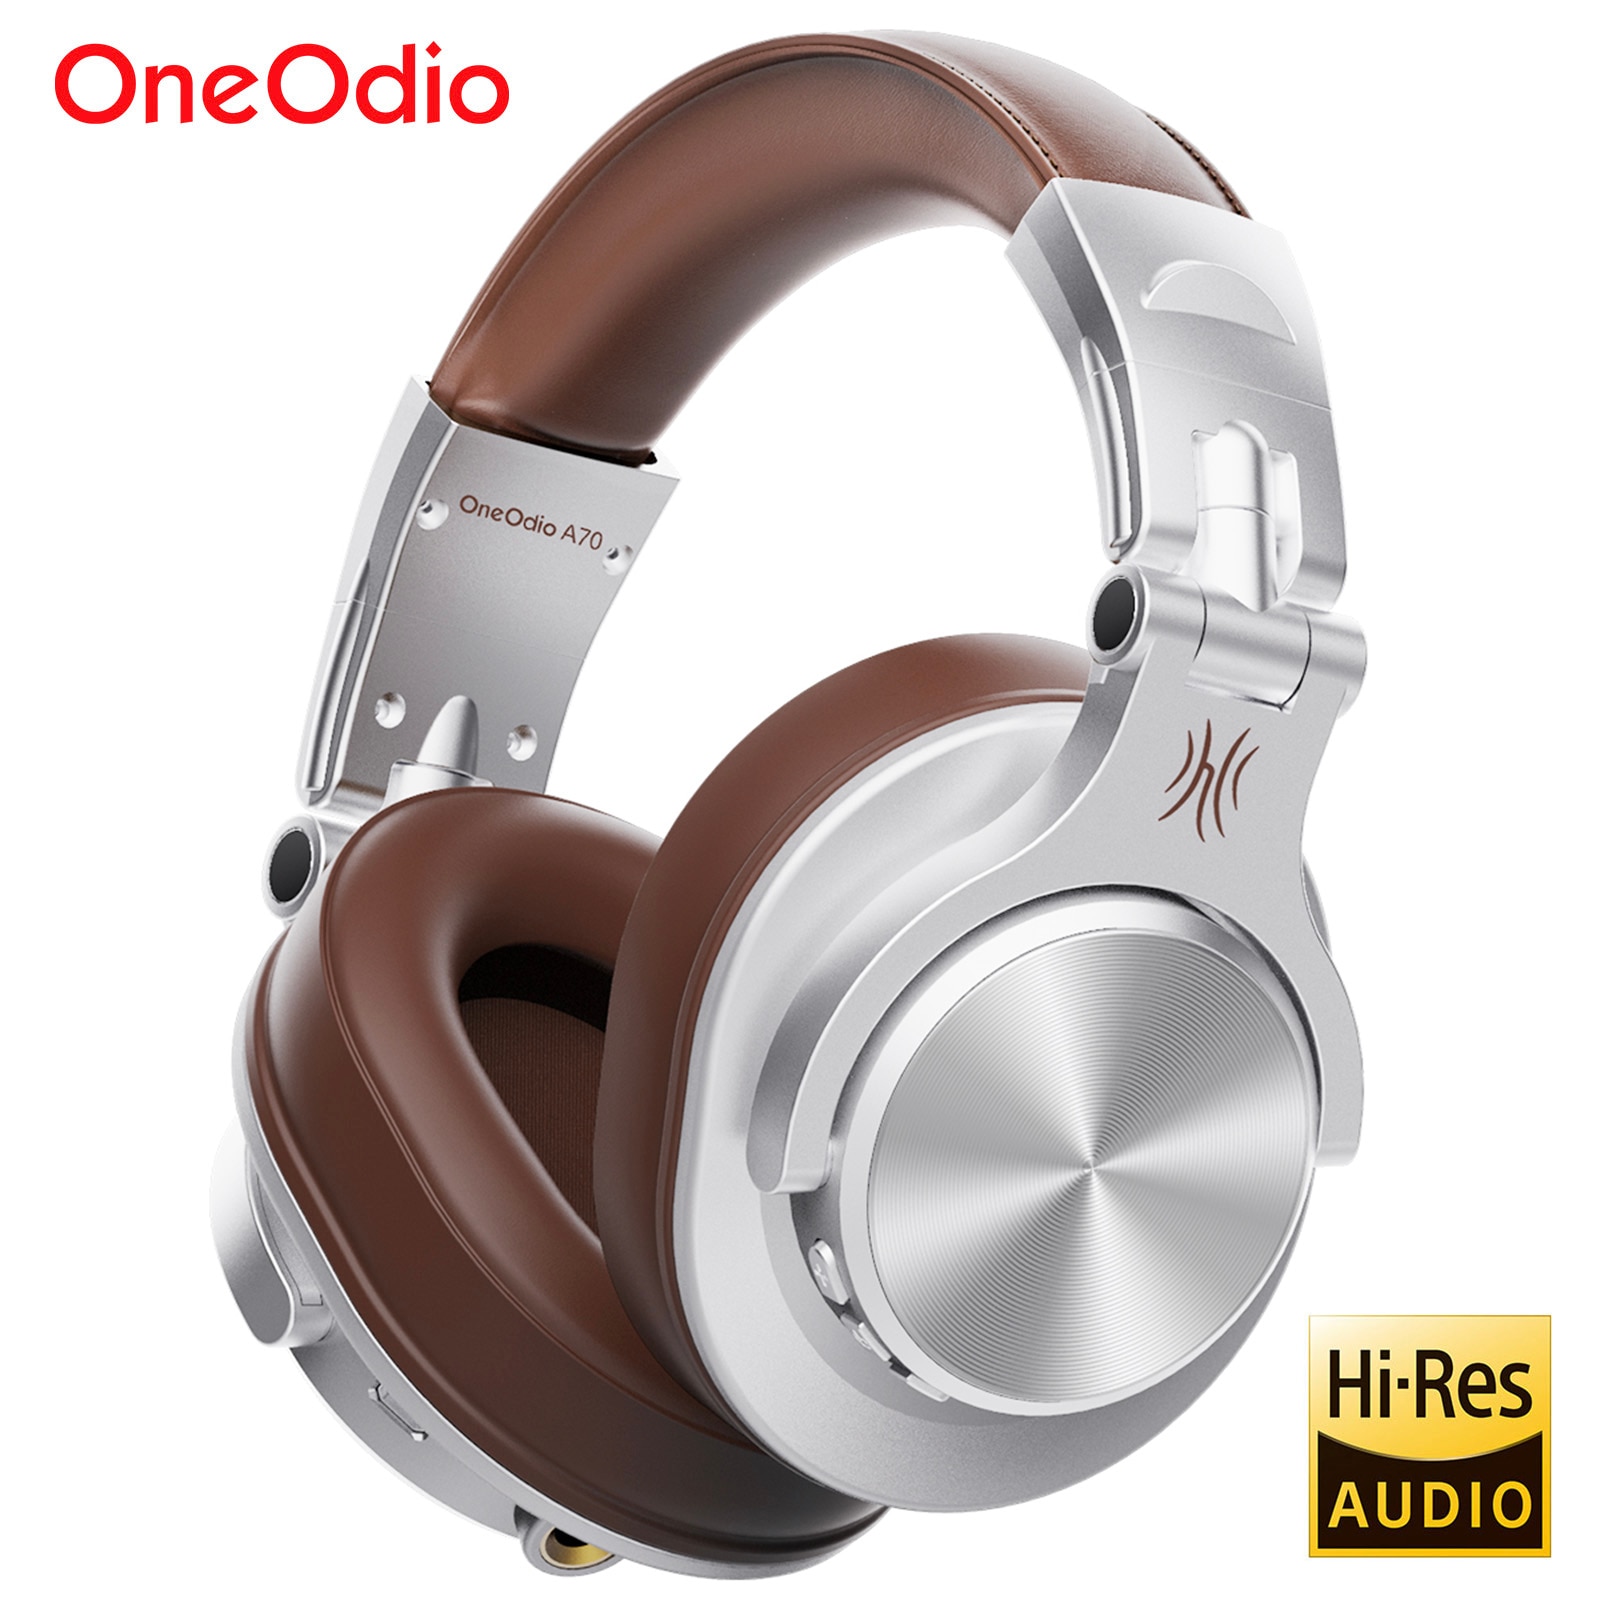 Oneodio A70 Fusion Wired/Wireless Headphones with Mic